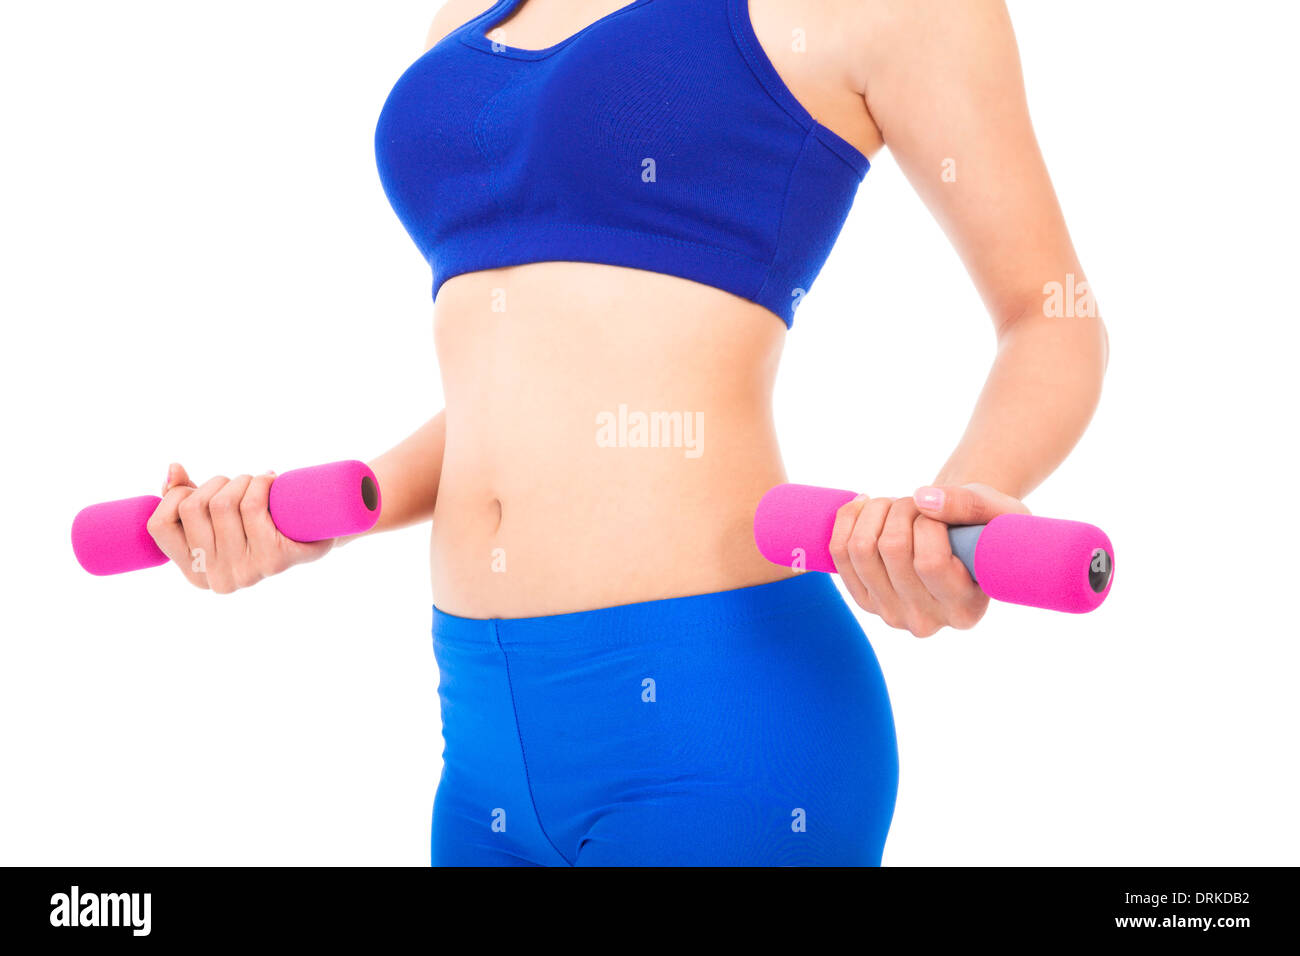 Woman body part with fitness dumbell over white background Stock Photo